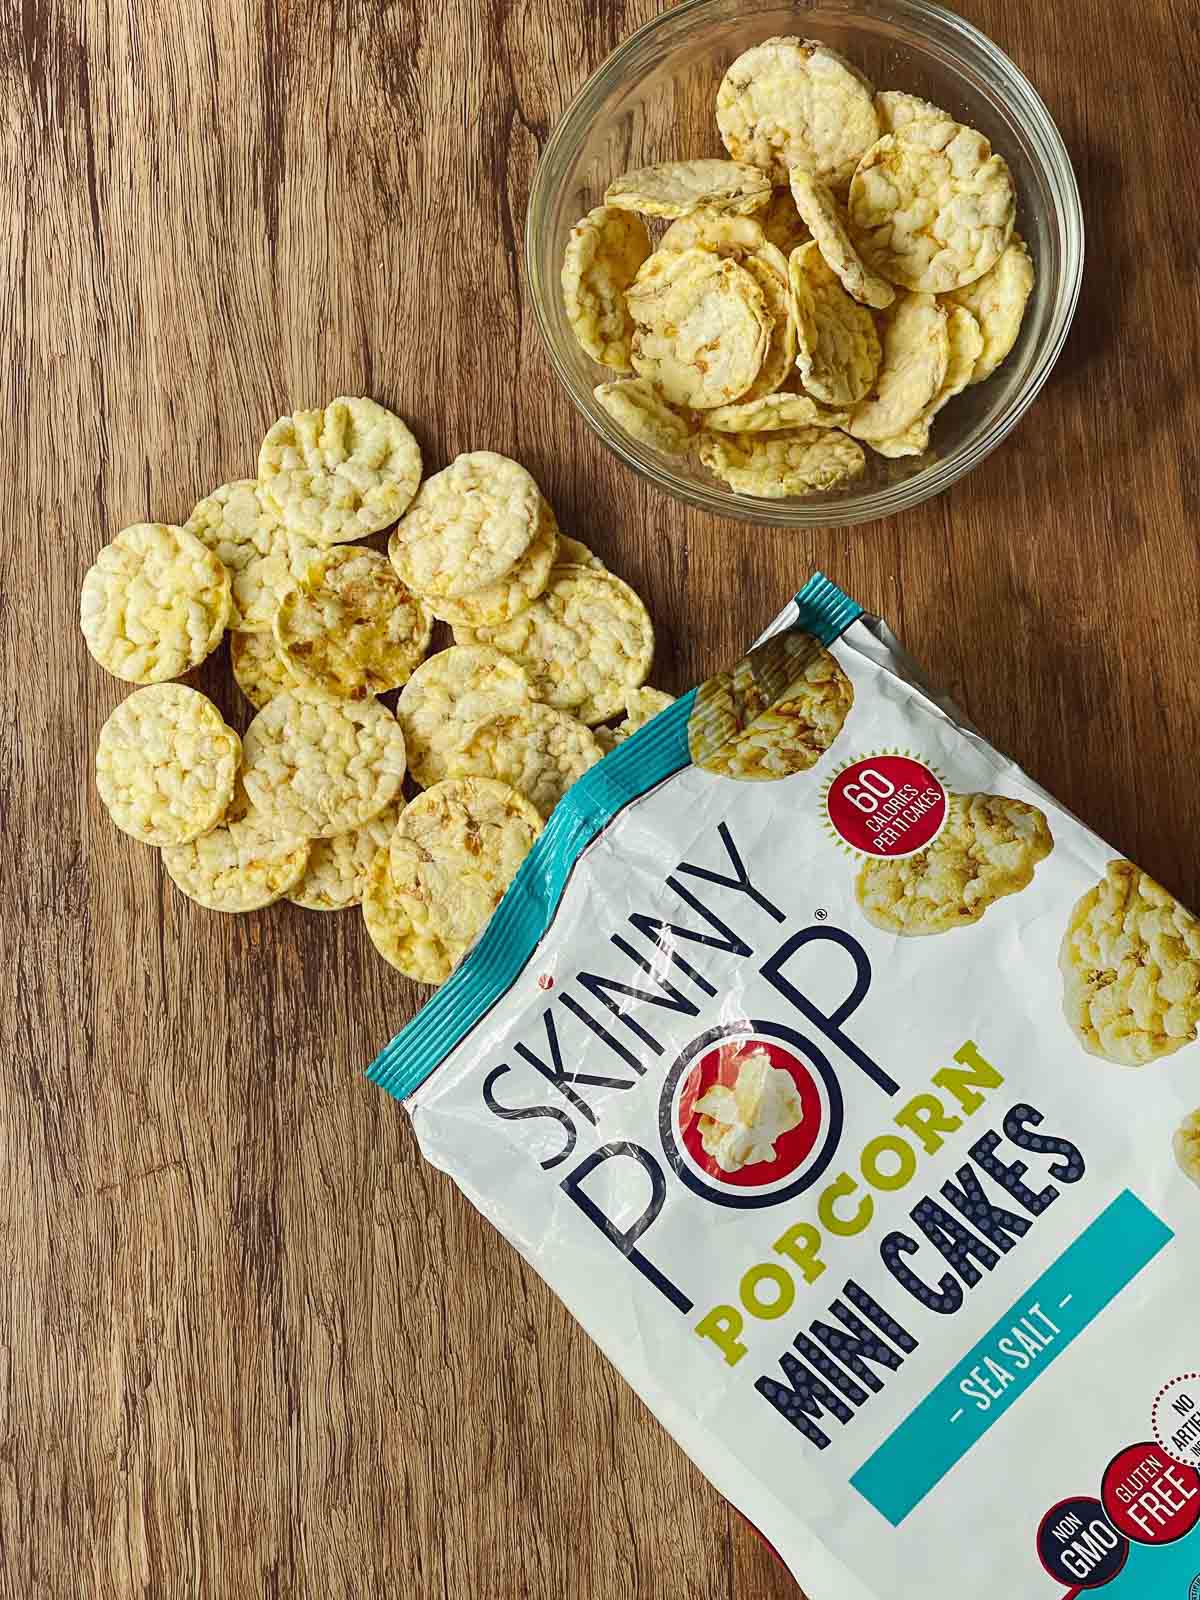 A bag of Skinny Pop mini popcorn cakes on top of a wooden board with mini cakes coming out of the bag and a side of mini cakes in a glass bowl.